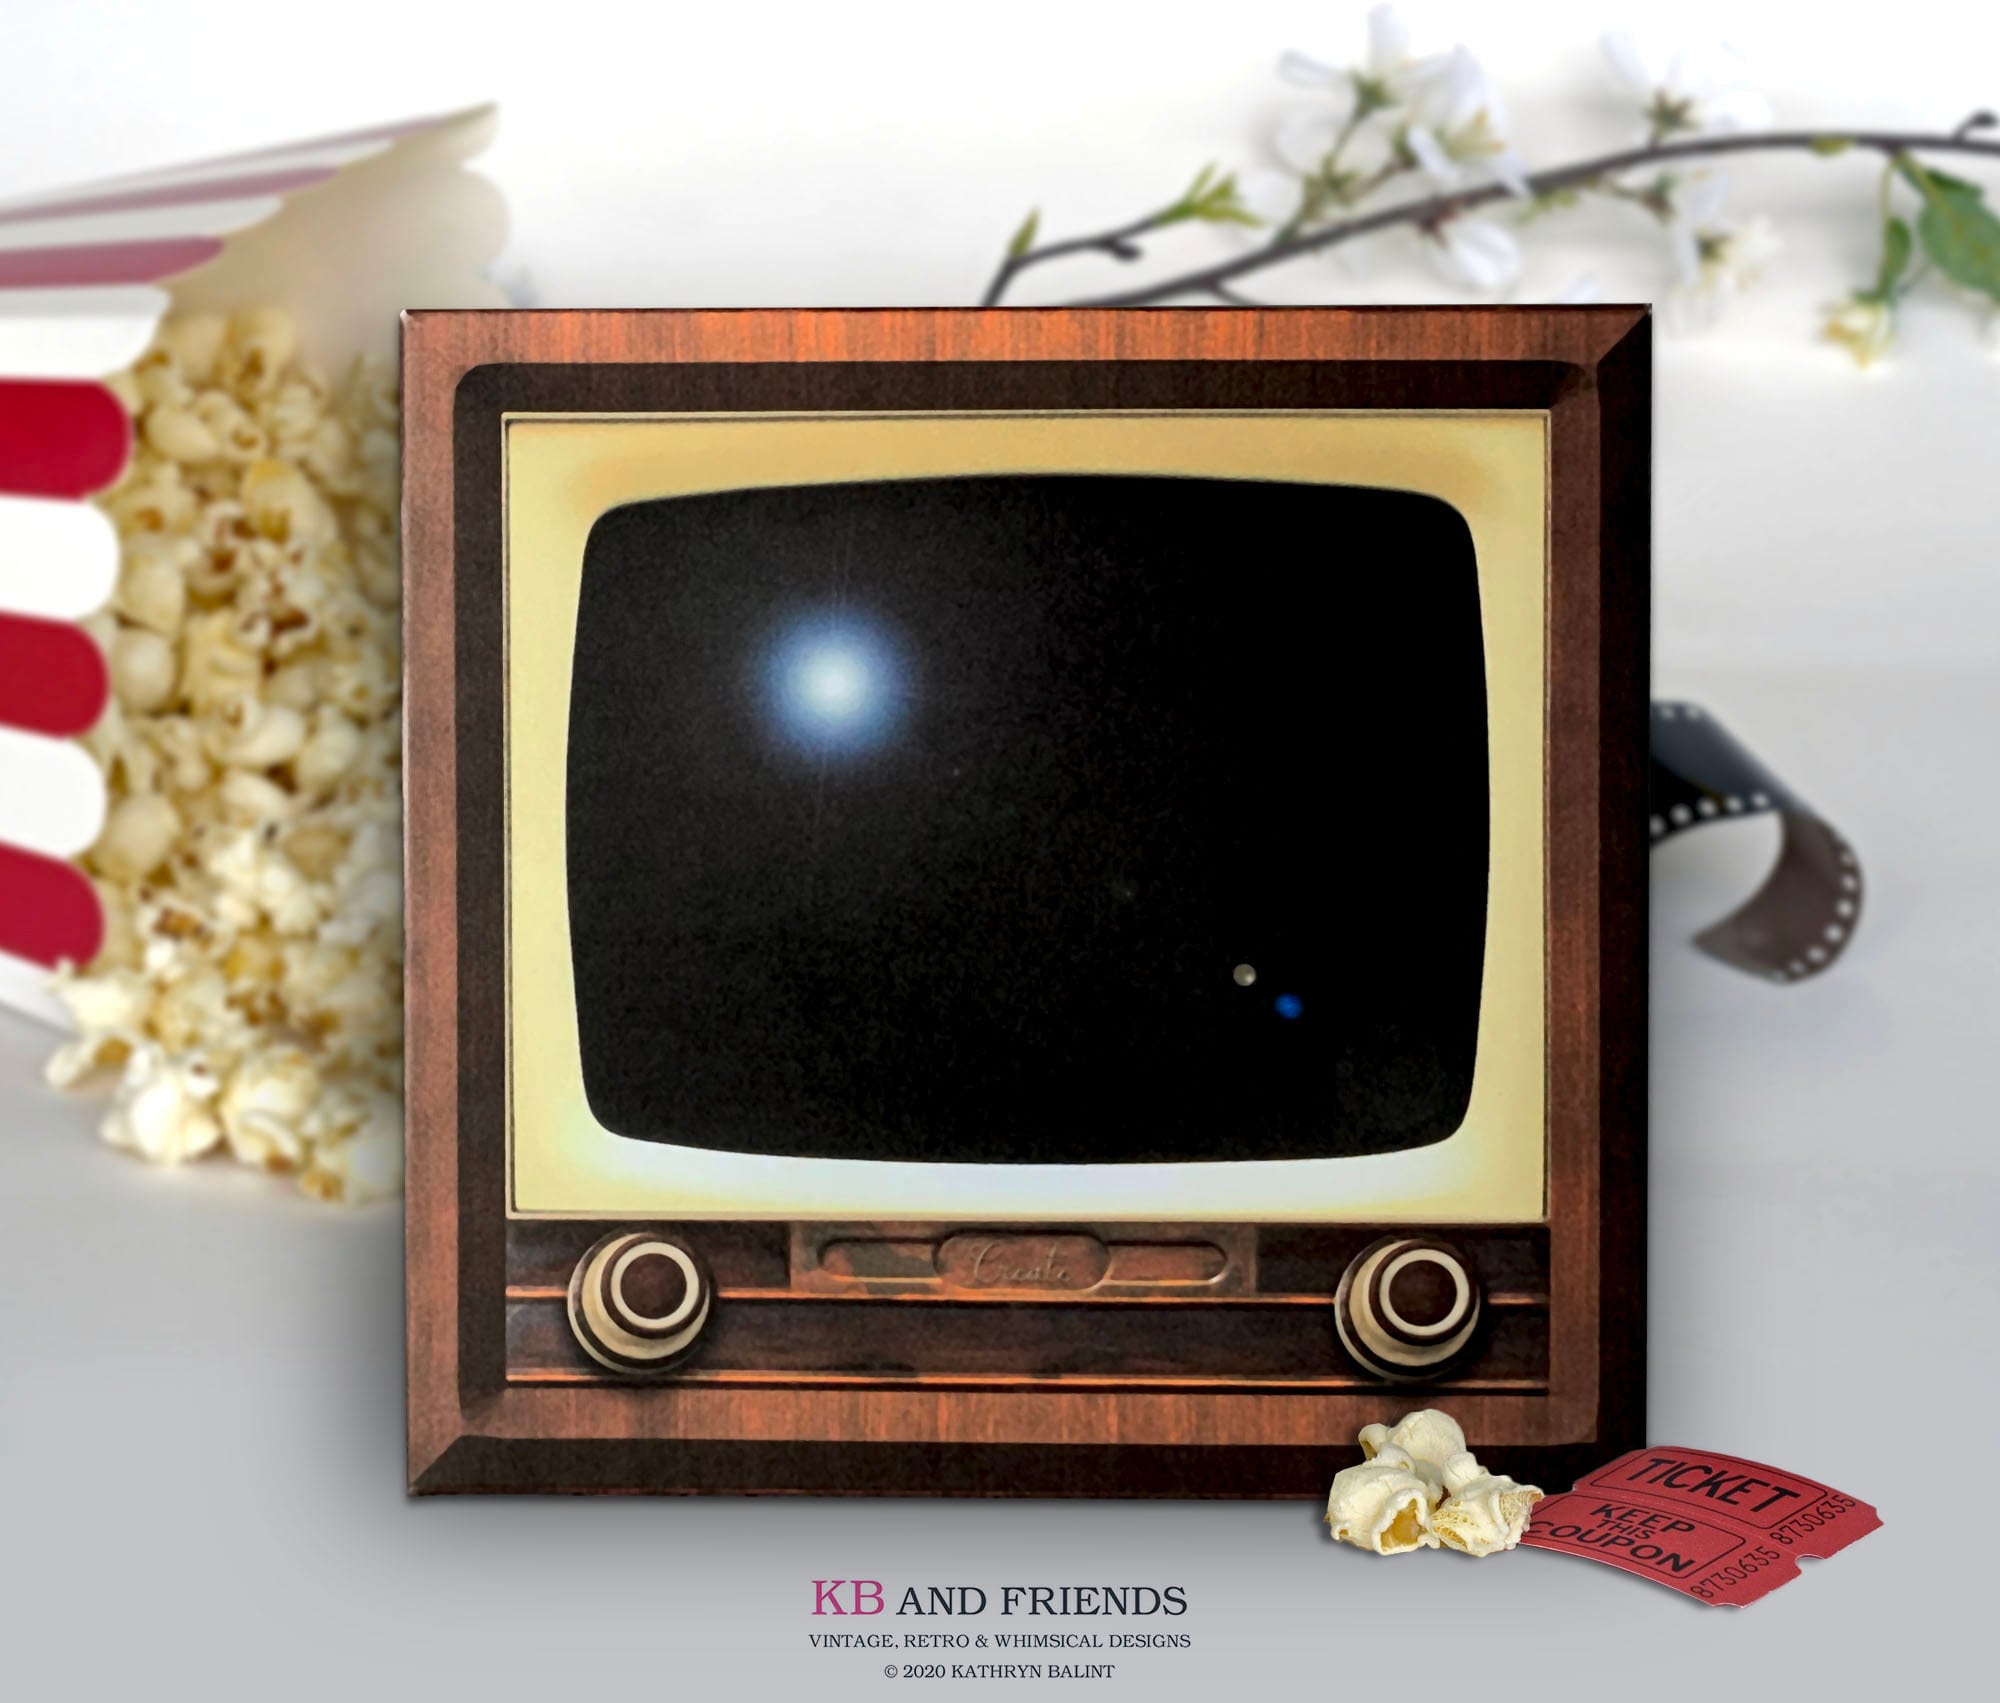 Retro TV Box Template / Vintage Television DIY Box for Crafts, Diorama,  Shadowbox, Candy, Treats, Gifts / 4.75 by 4.5 by 1.5 / Gift Box 